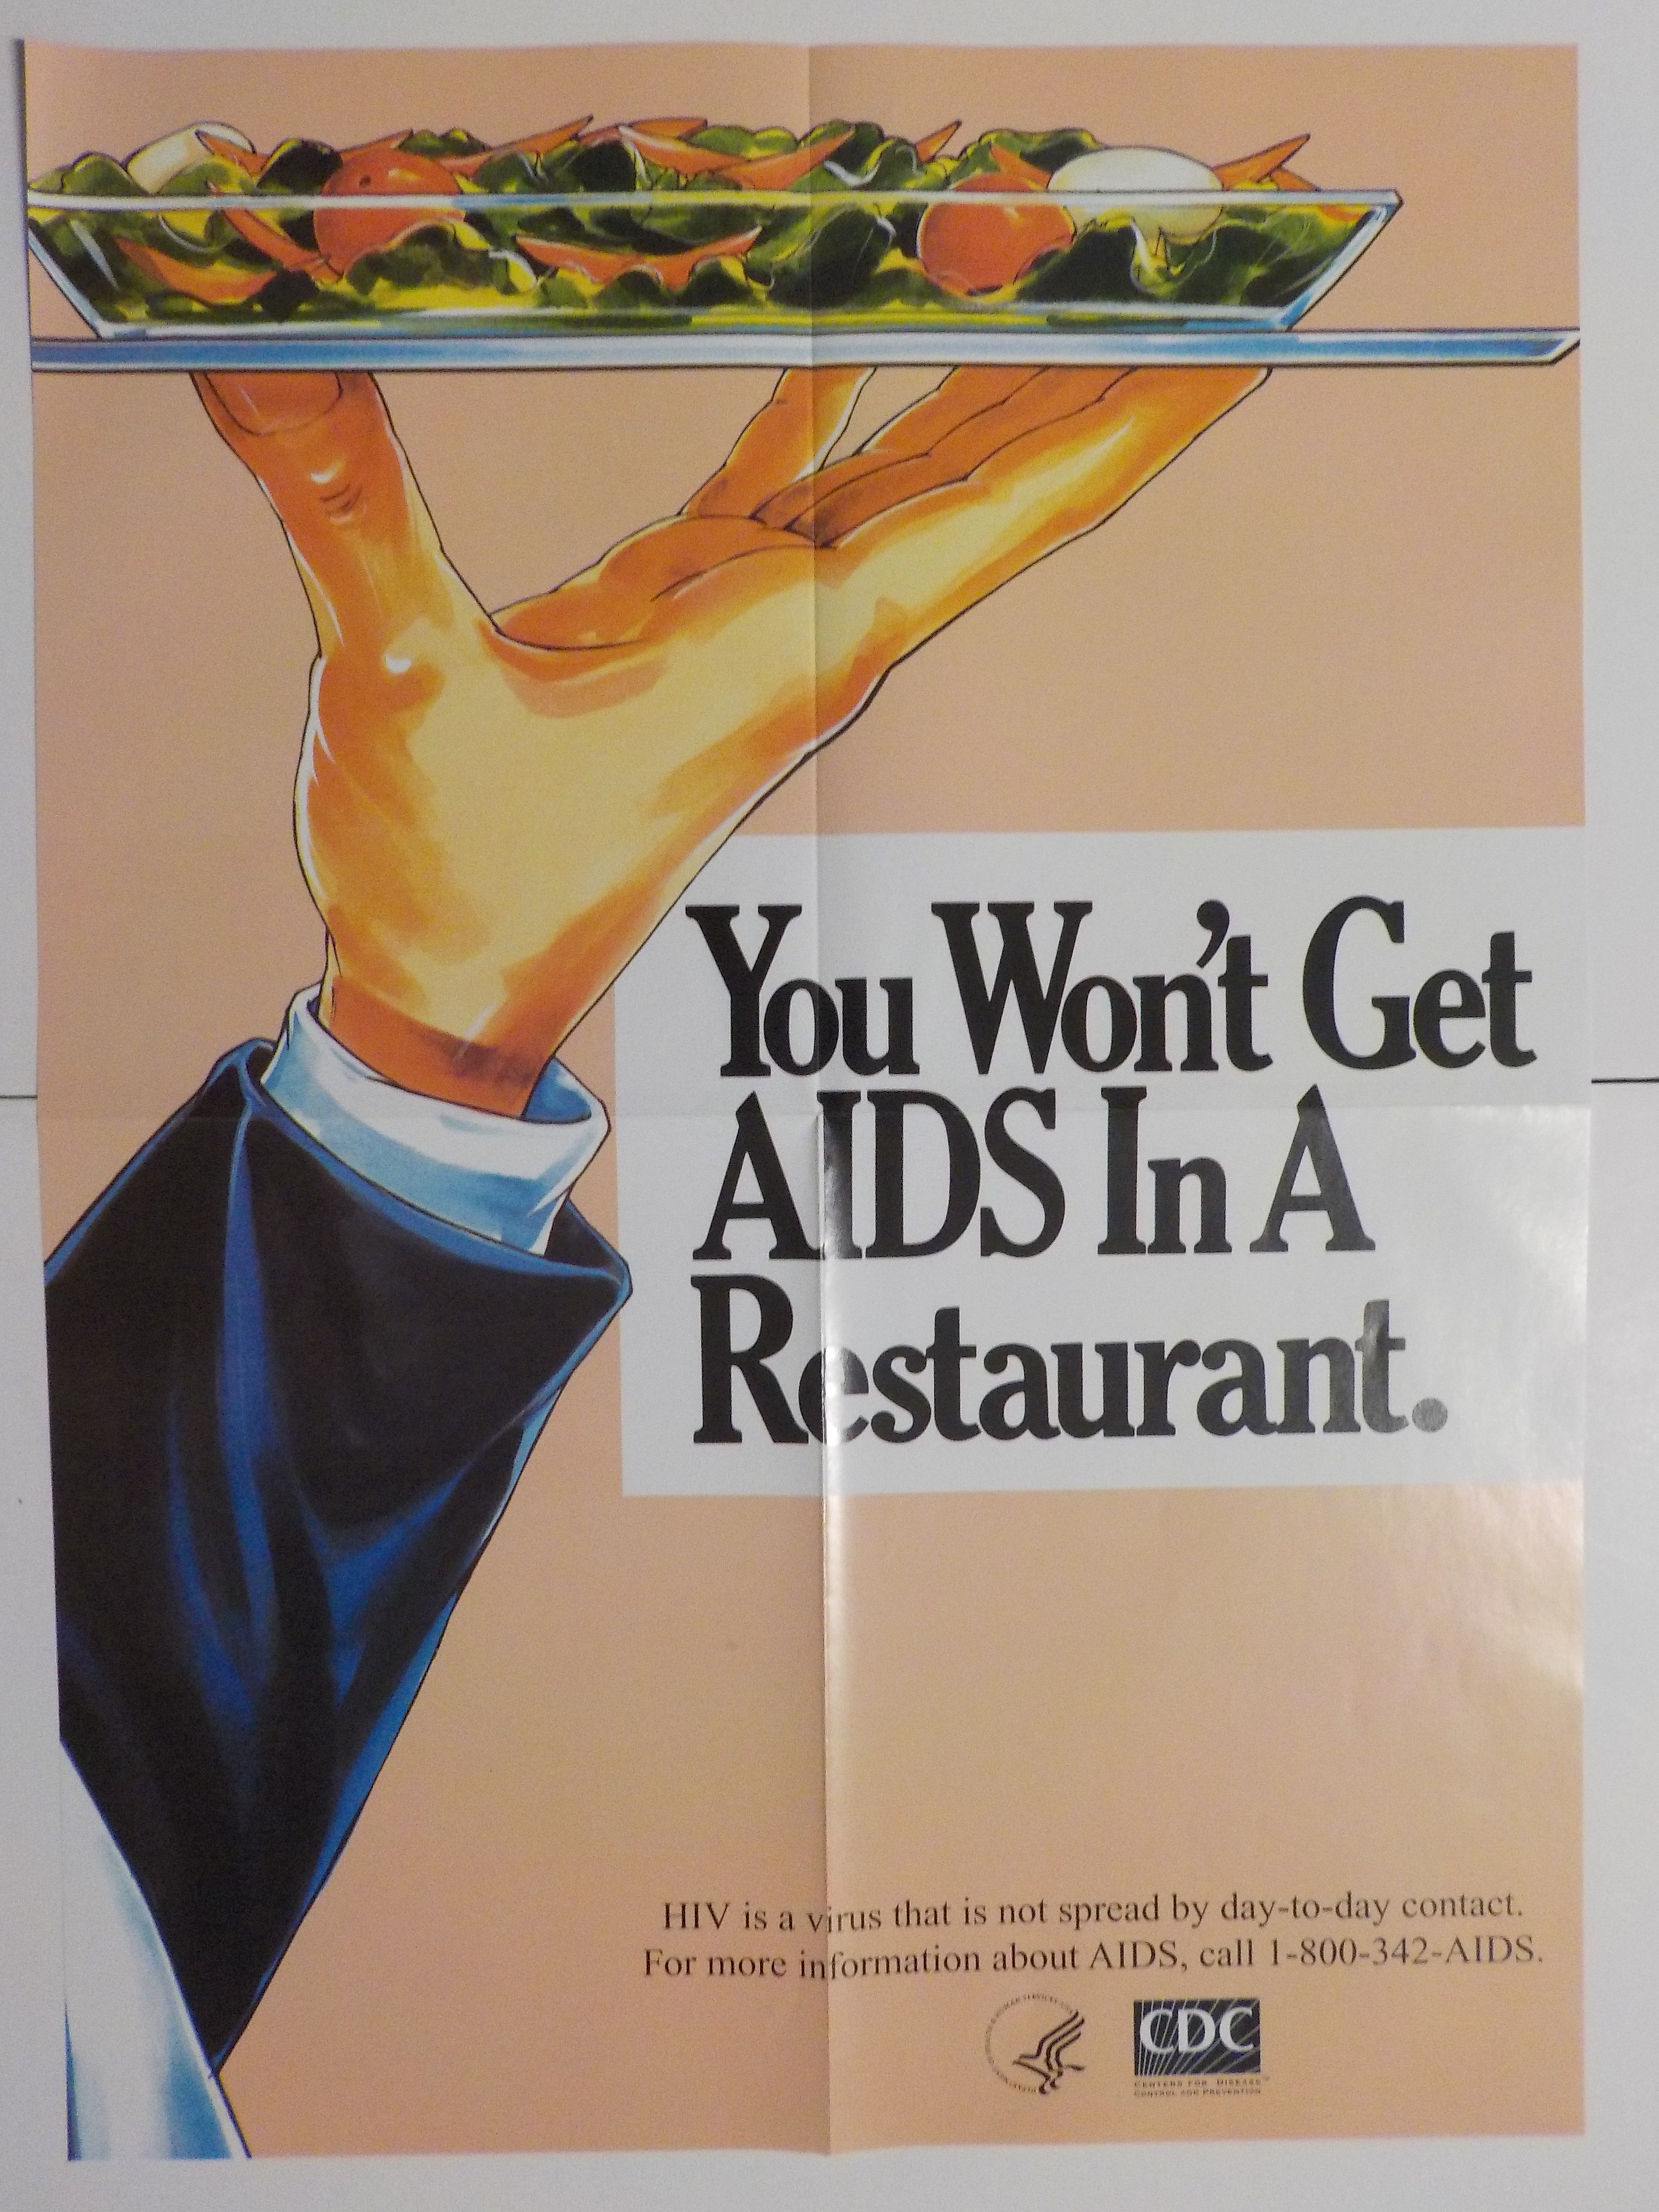 You won't get AIDS in a restaurant